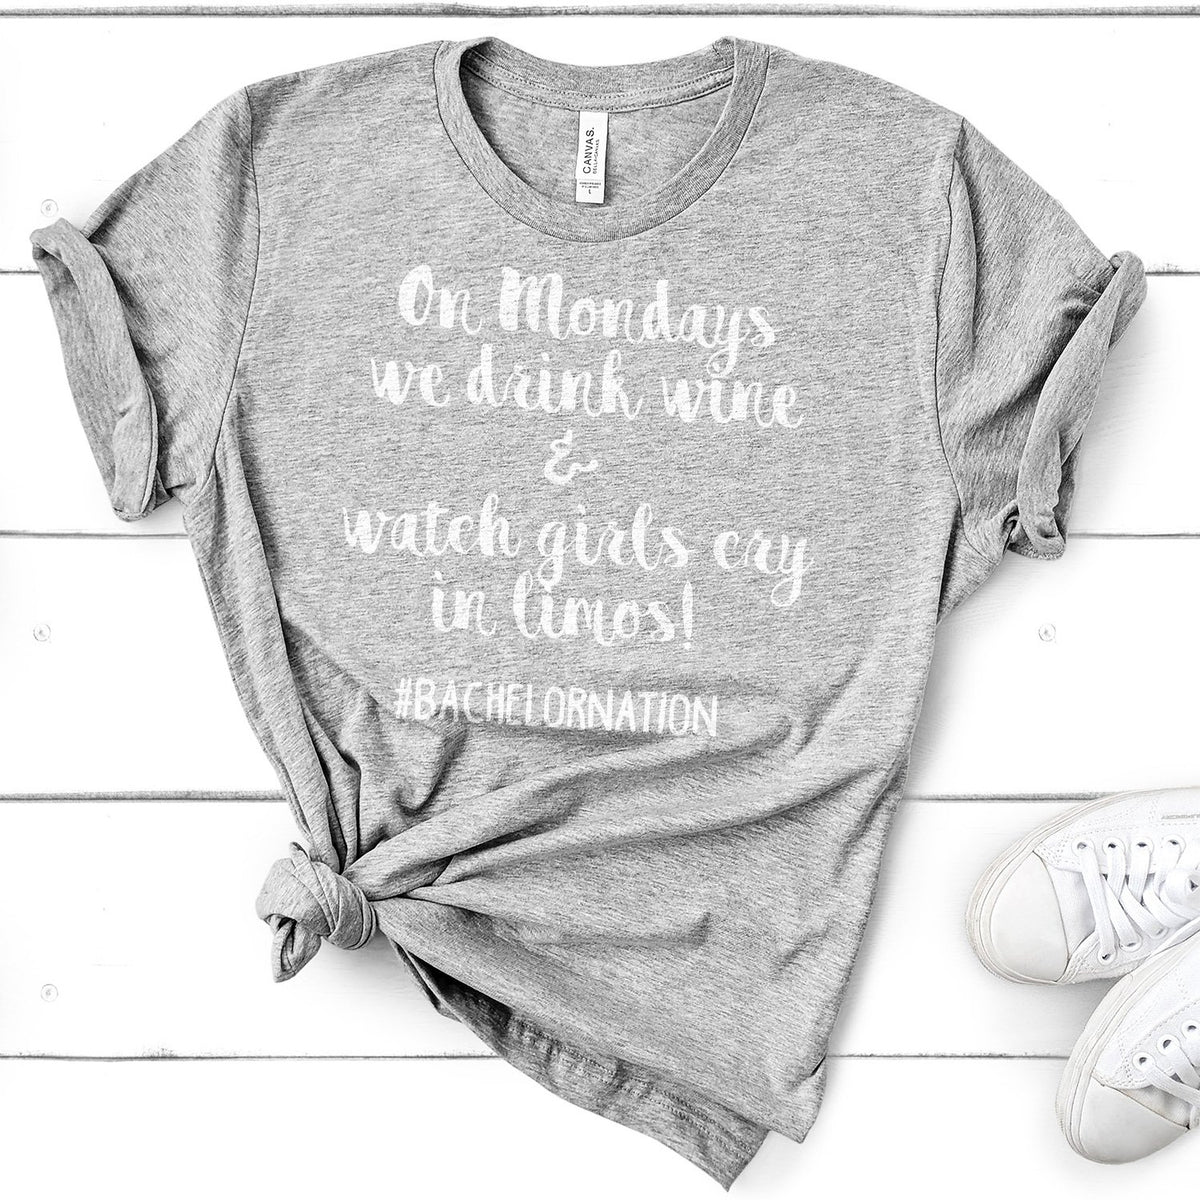 On Mondays We Drink Wine &amp; Watch Girls Cry in Limos - Short Sleeve Tee Shirt